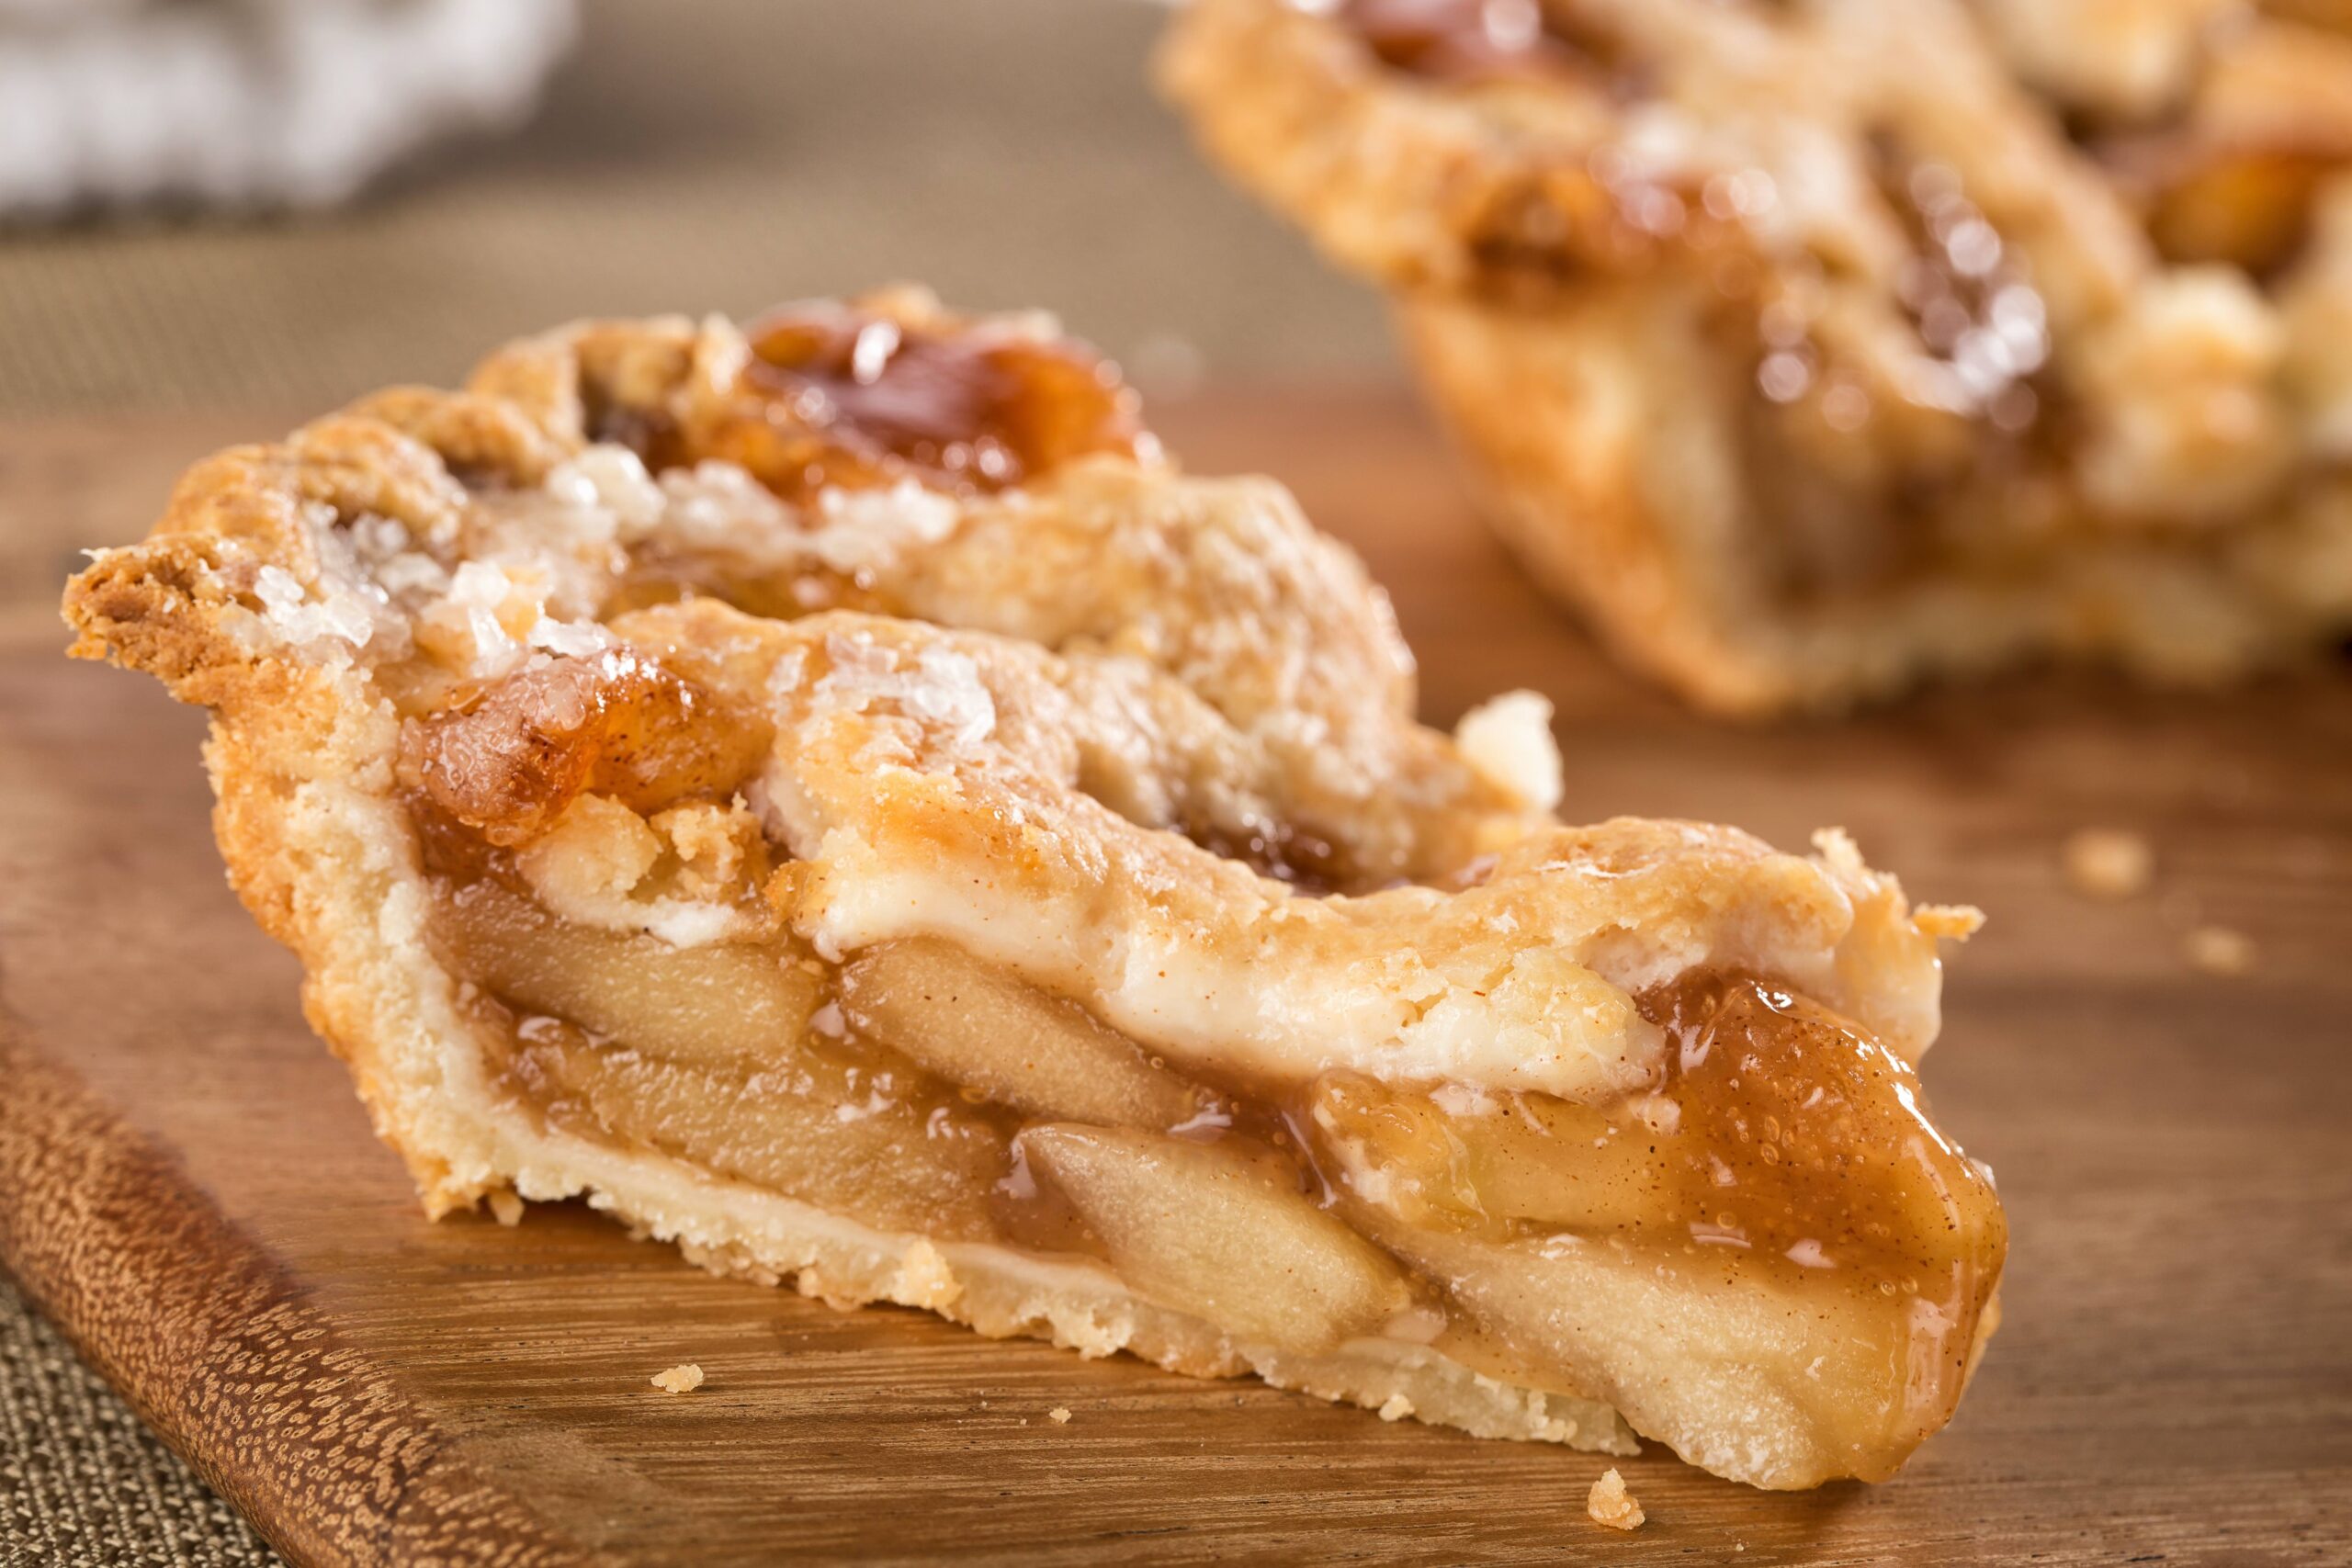 A close up of a slice of apple pie